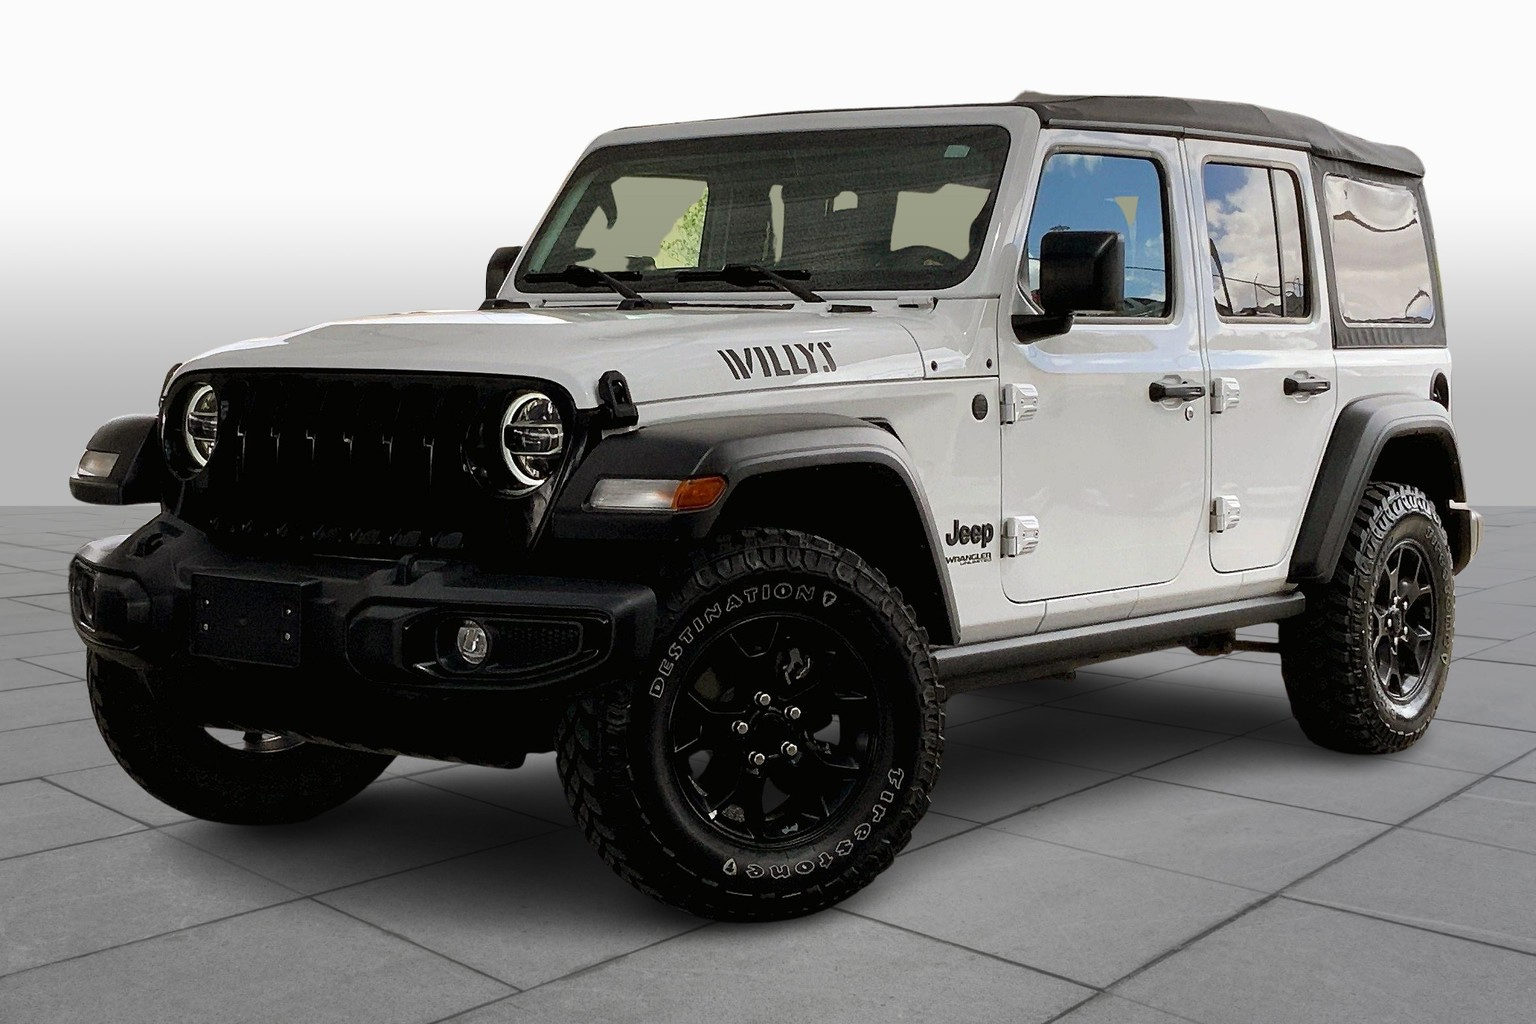 Pre-Owned 2022 Jeep Wrangler Unlimited Willys SUV in El Paso #NW116881 |  Shamaley Buick GMC